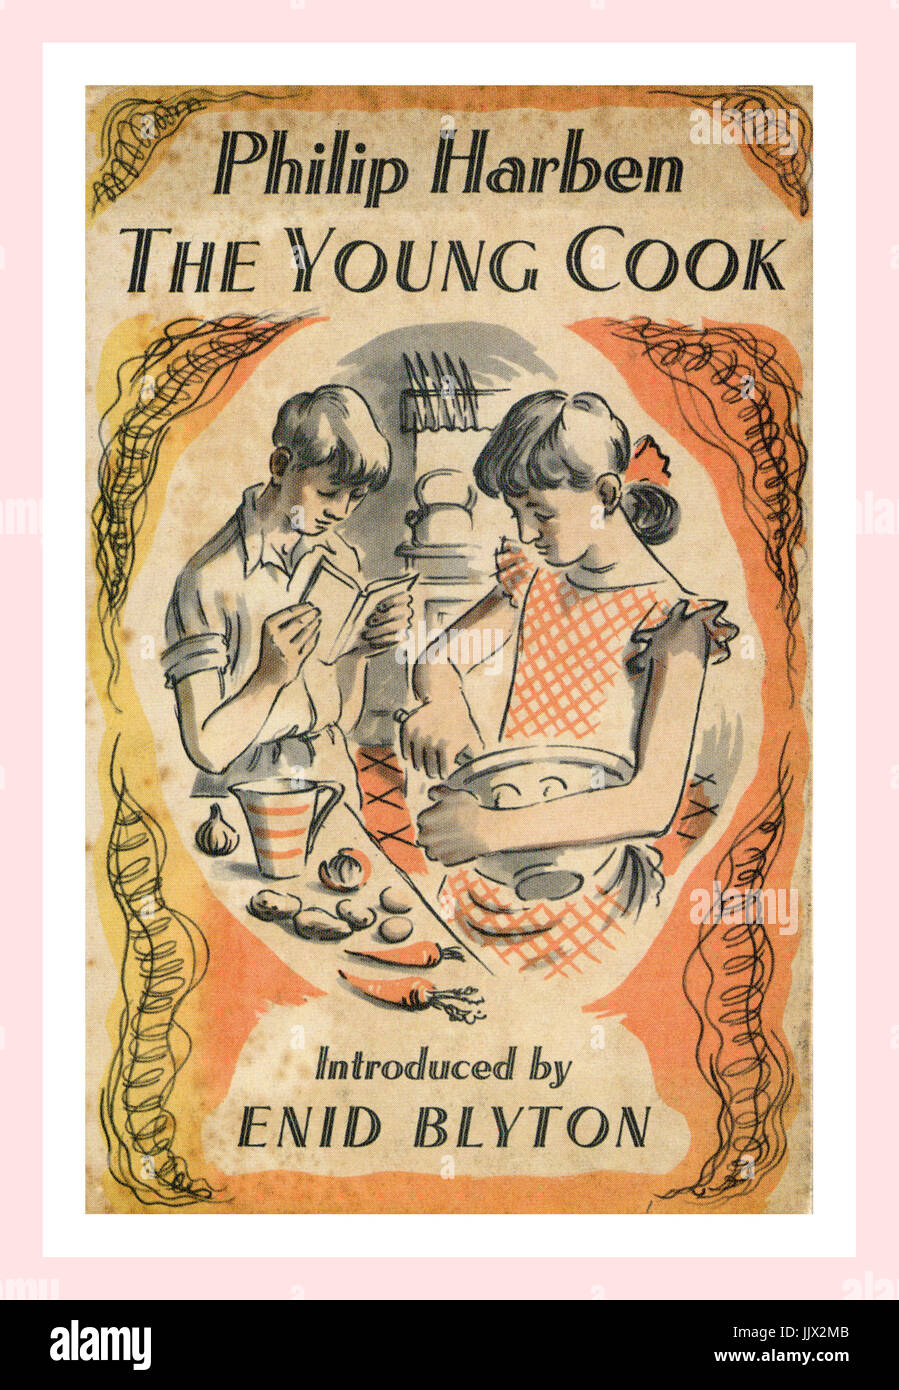 1952 book by chef Philip Harben 'The Young Cook' promoting cookery for youngsters in the early 1950s. Introduced by Enid Blyton Stock Photo